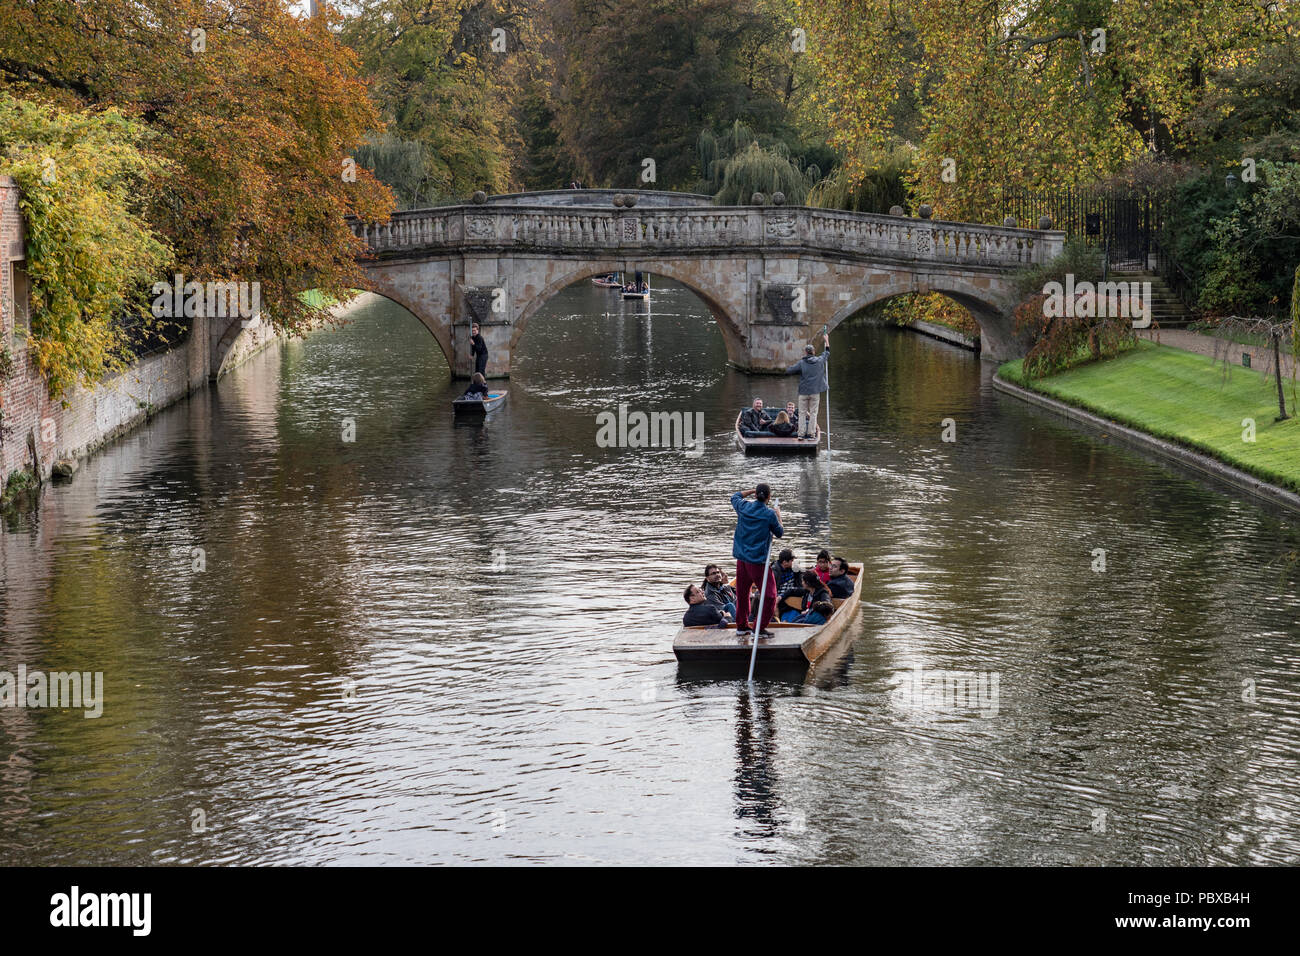 Cambridge visitors in punts on the River Cam in Cambridge, England UK. Stock Photo